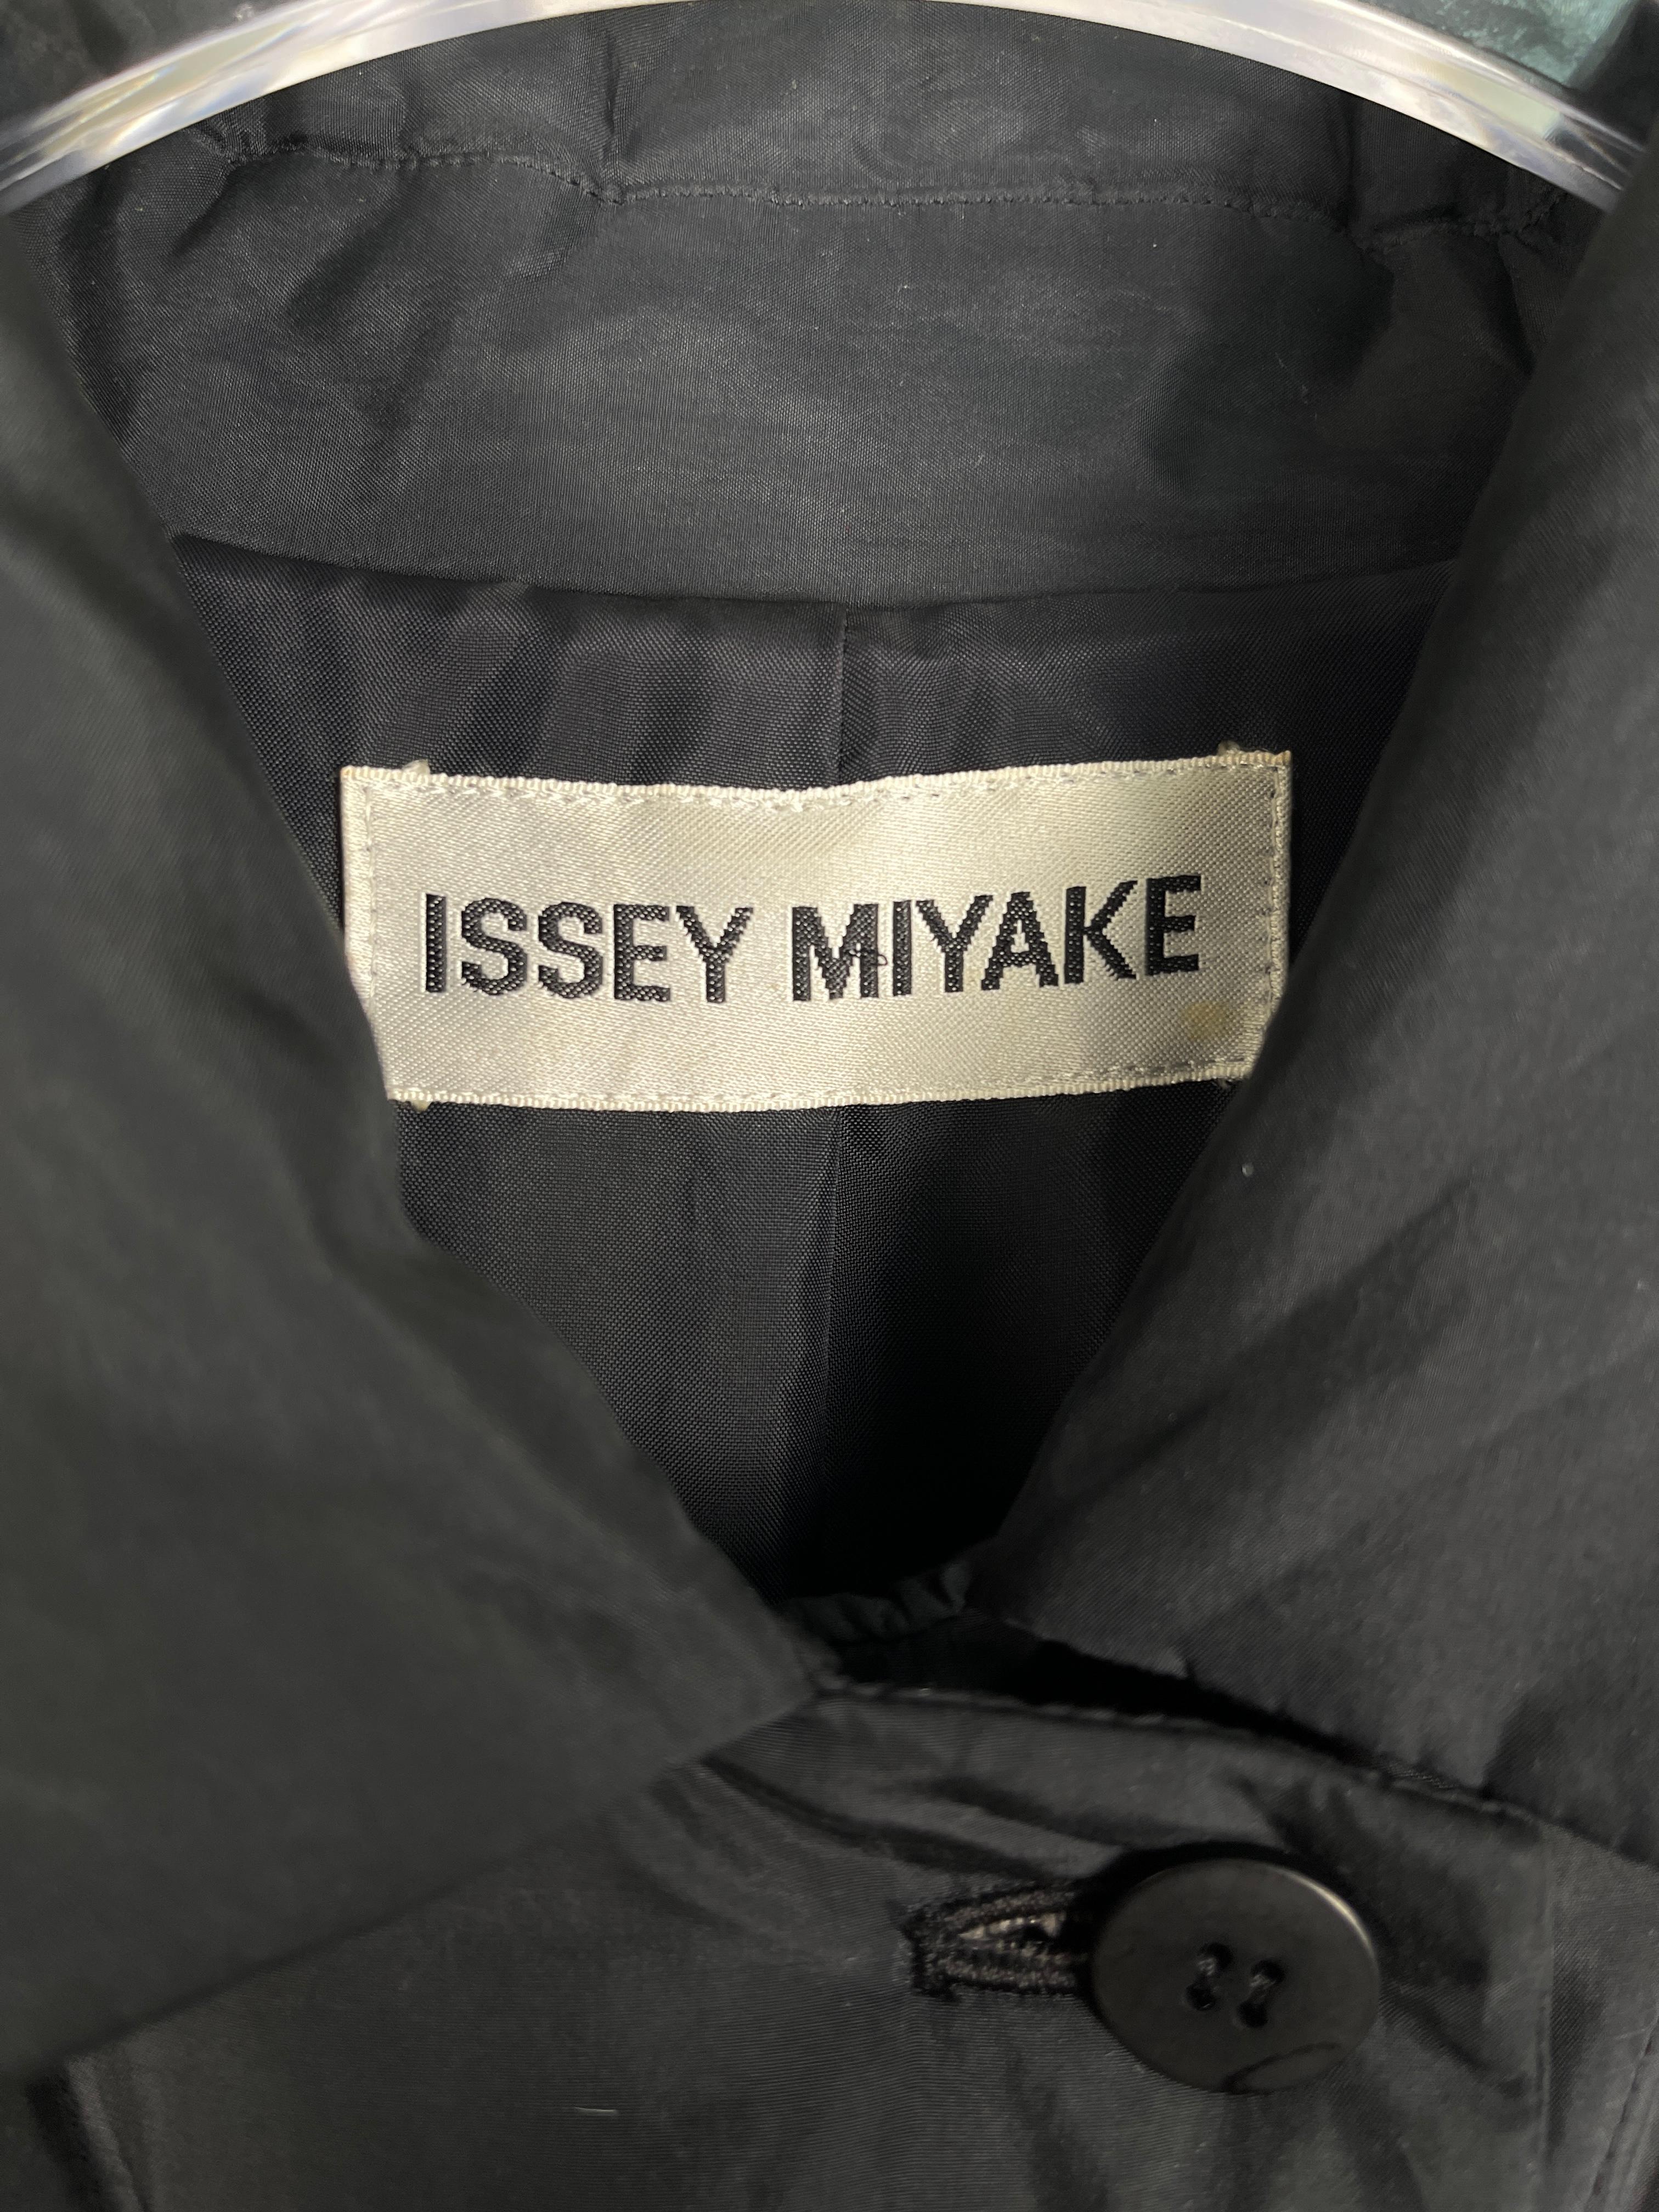 Unisex piece. The piece was part of Issey Miyake Womenswear 1996 Runway.

Size: M, fits true to size.

Condition: The piece is in near pristine condition. Every piece from our collection is in near pristine condition. Exceptional otherwise will be